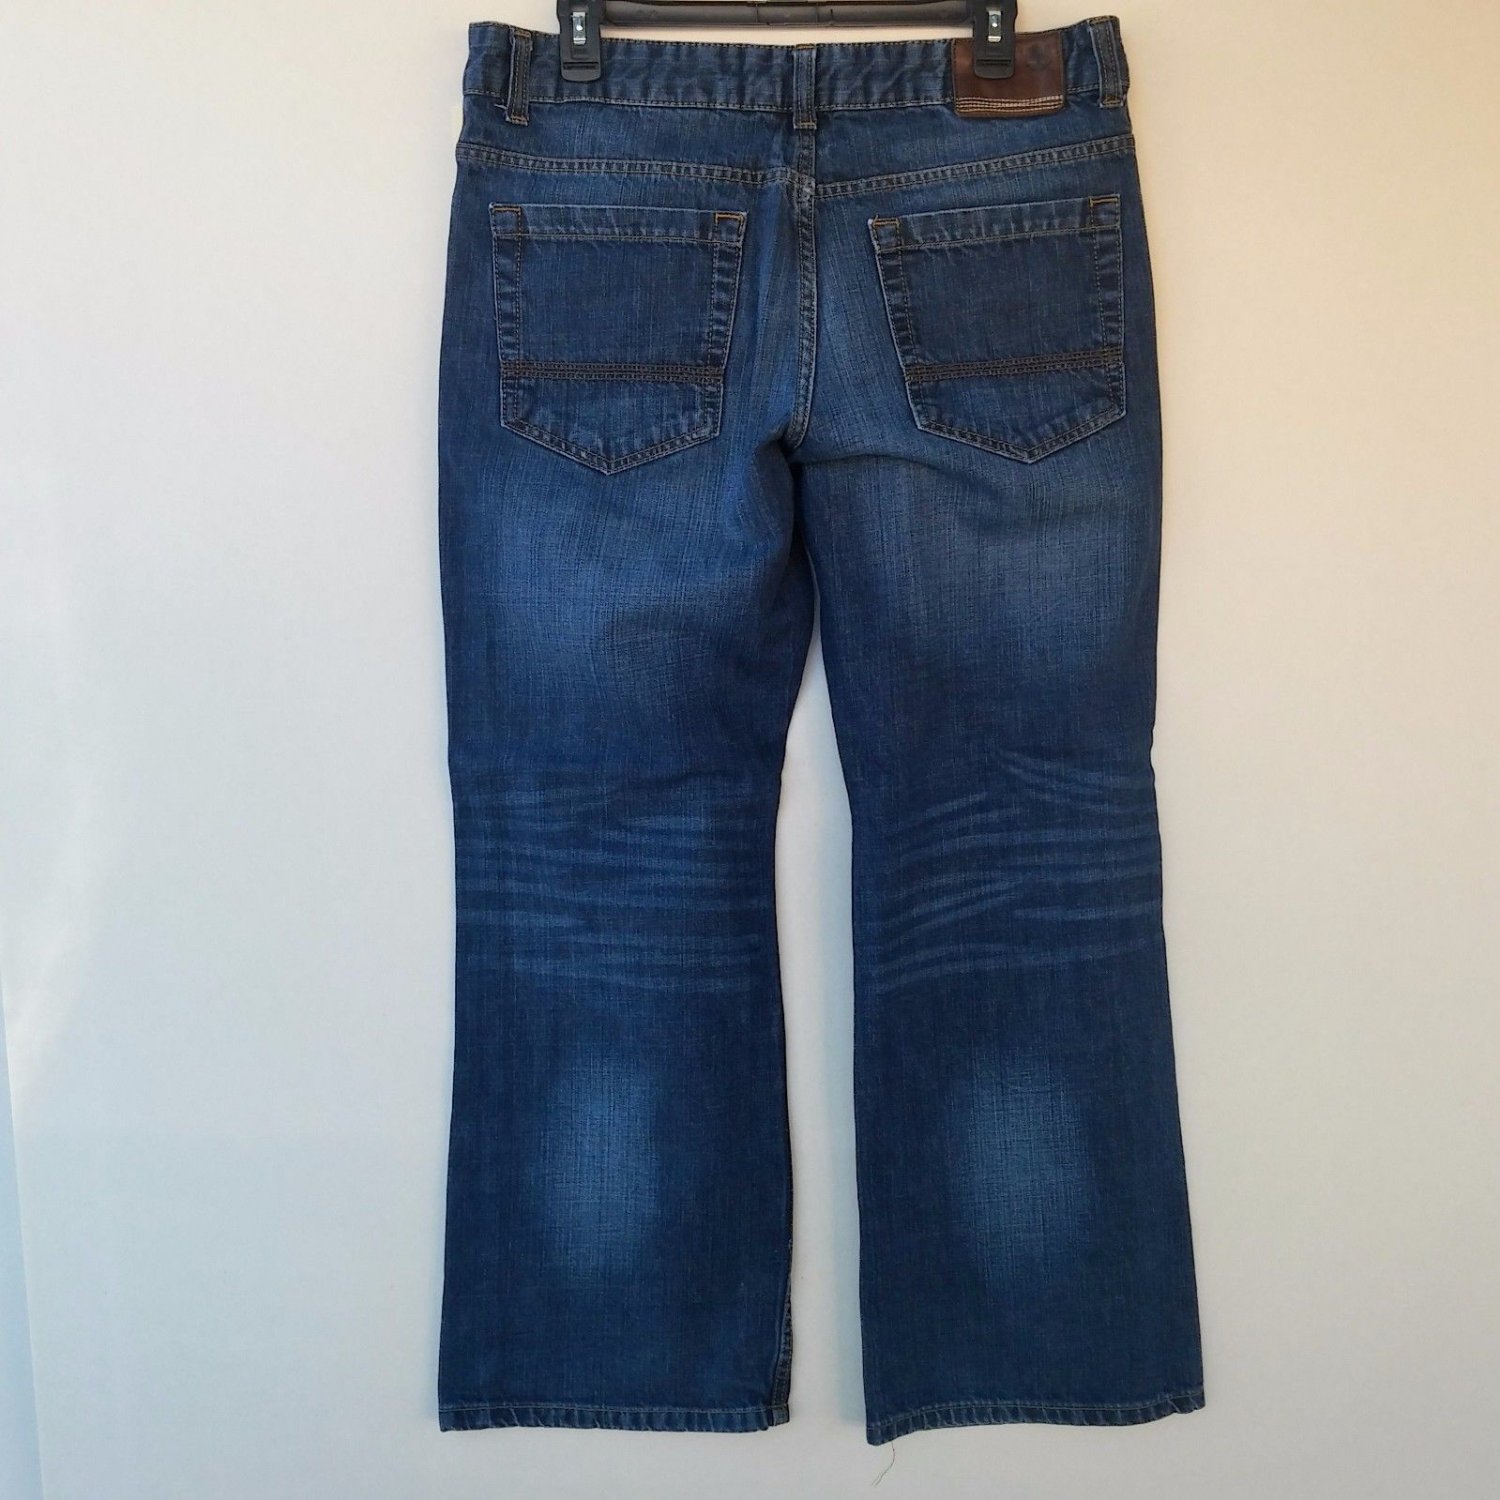 Timberland Boot Cut Men's jeans Size 34 X 28.5